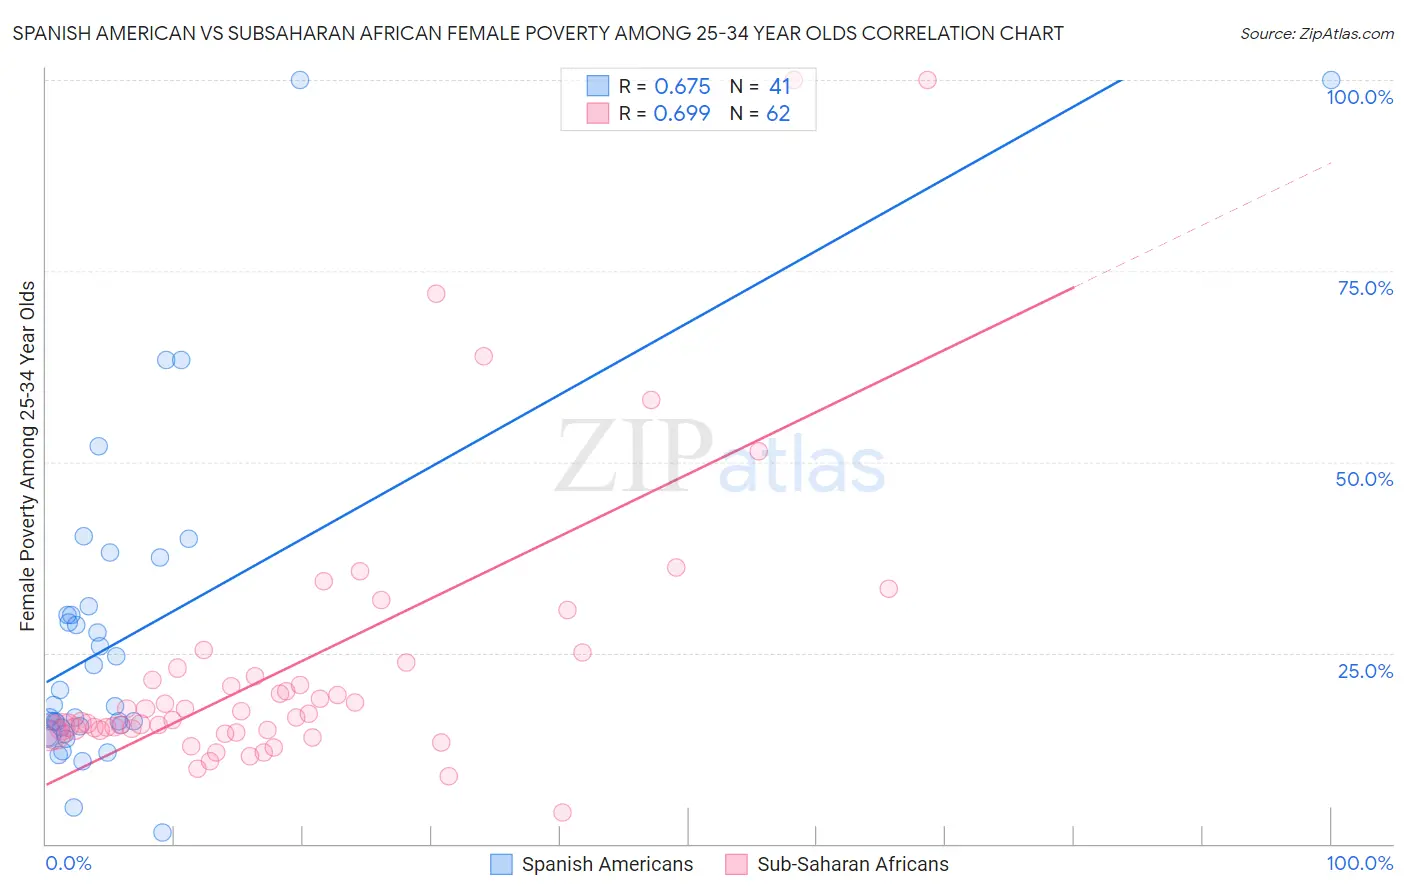 Spanish American vs Subsaharan African Female Poverty Among 25-34 Year Olds